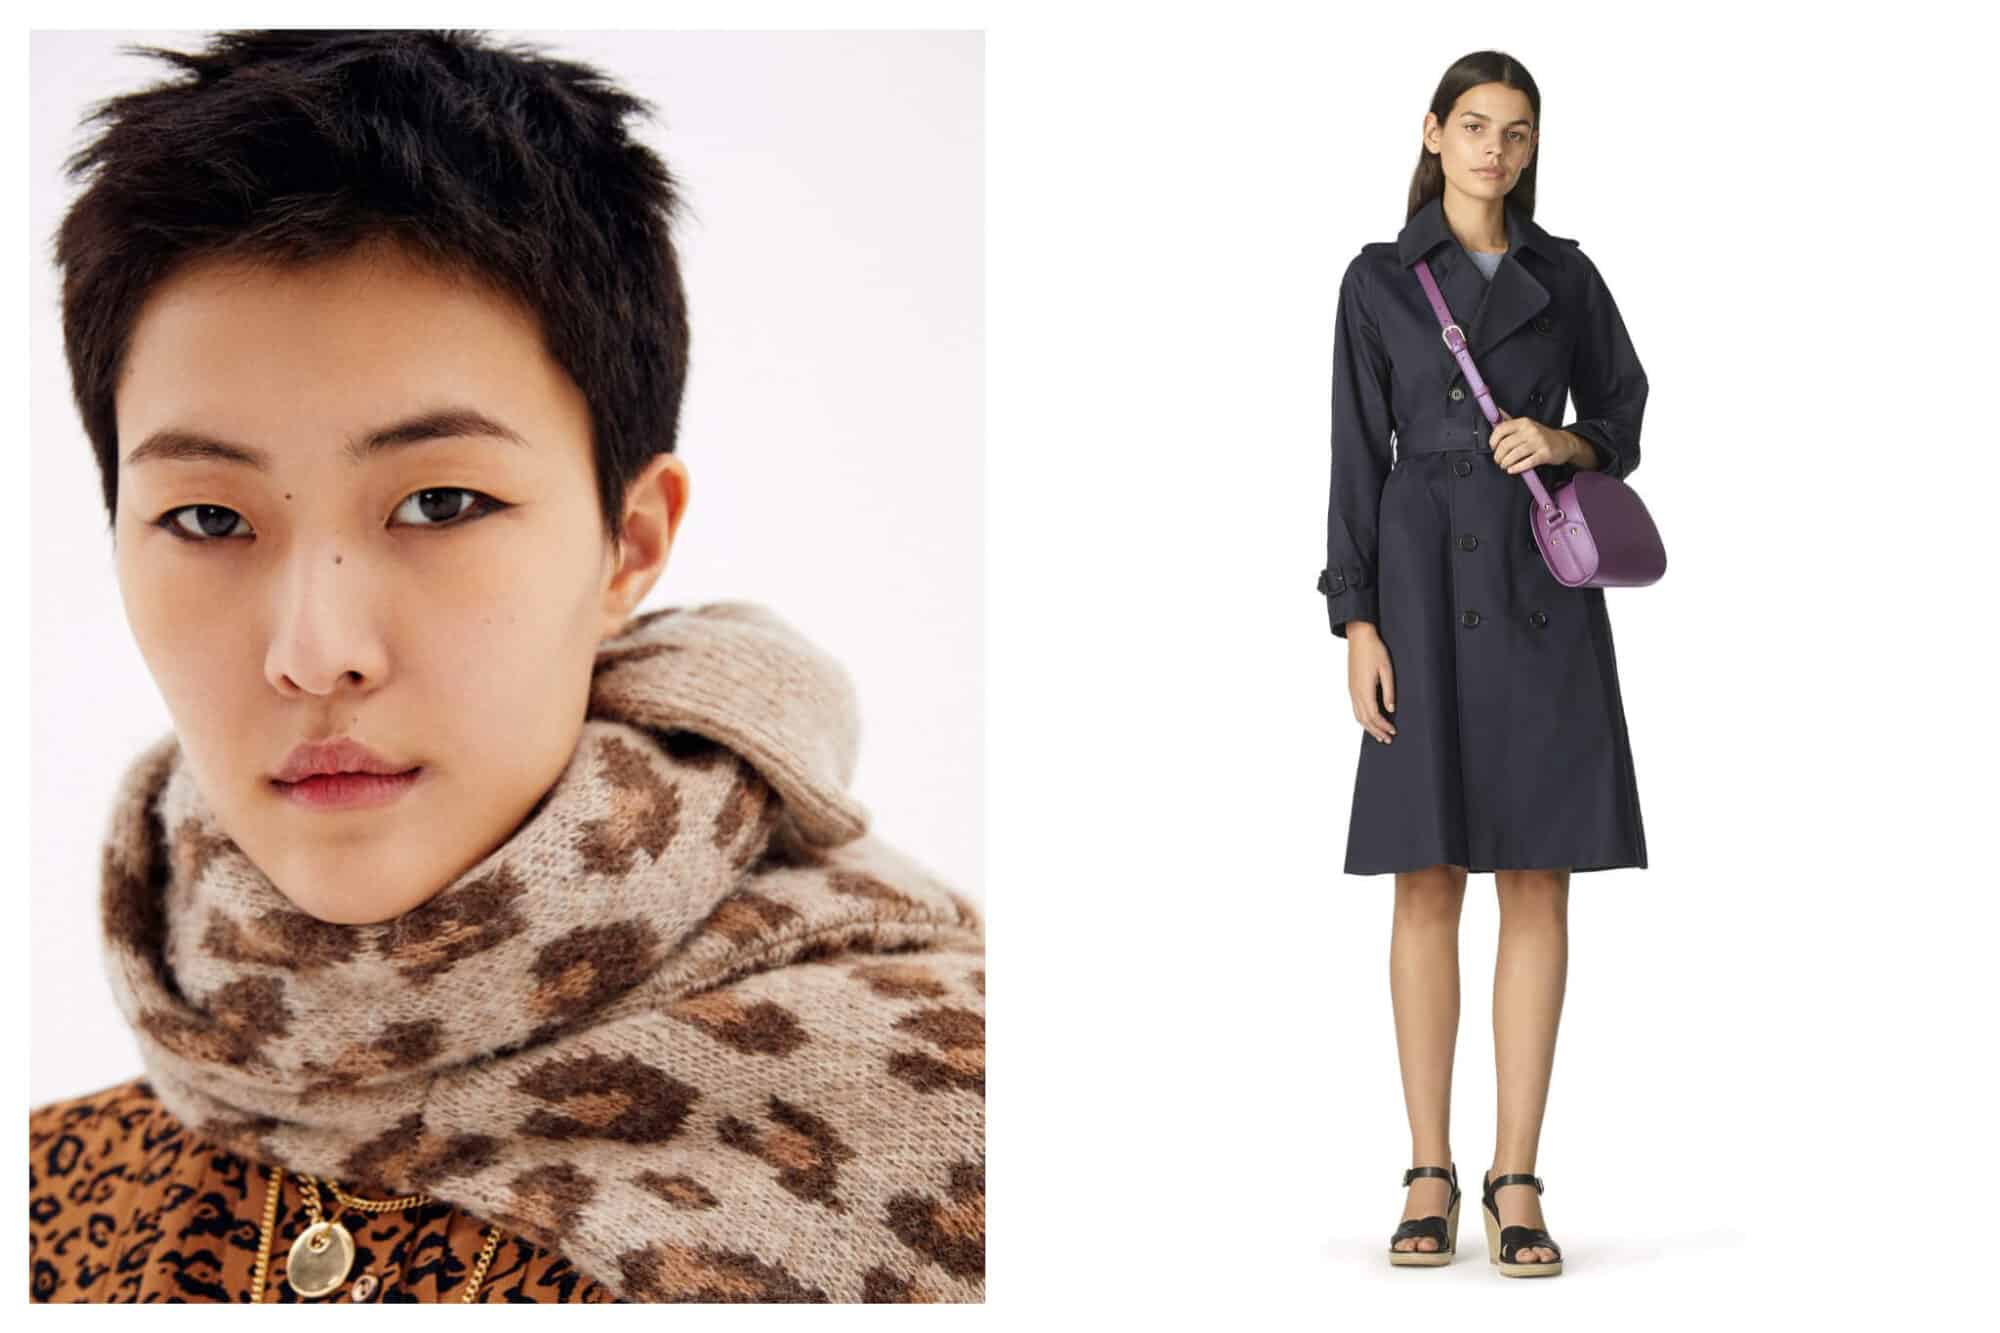 Left: A female model with short black hair wears winter scarf and sweater in contrasting animal prints.
Right: A female with long black hair models a black trench coat with a purple handbag draped across her diagonally. 